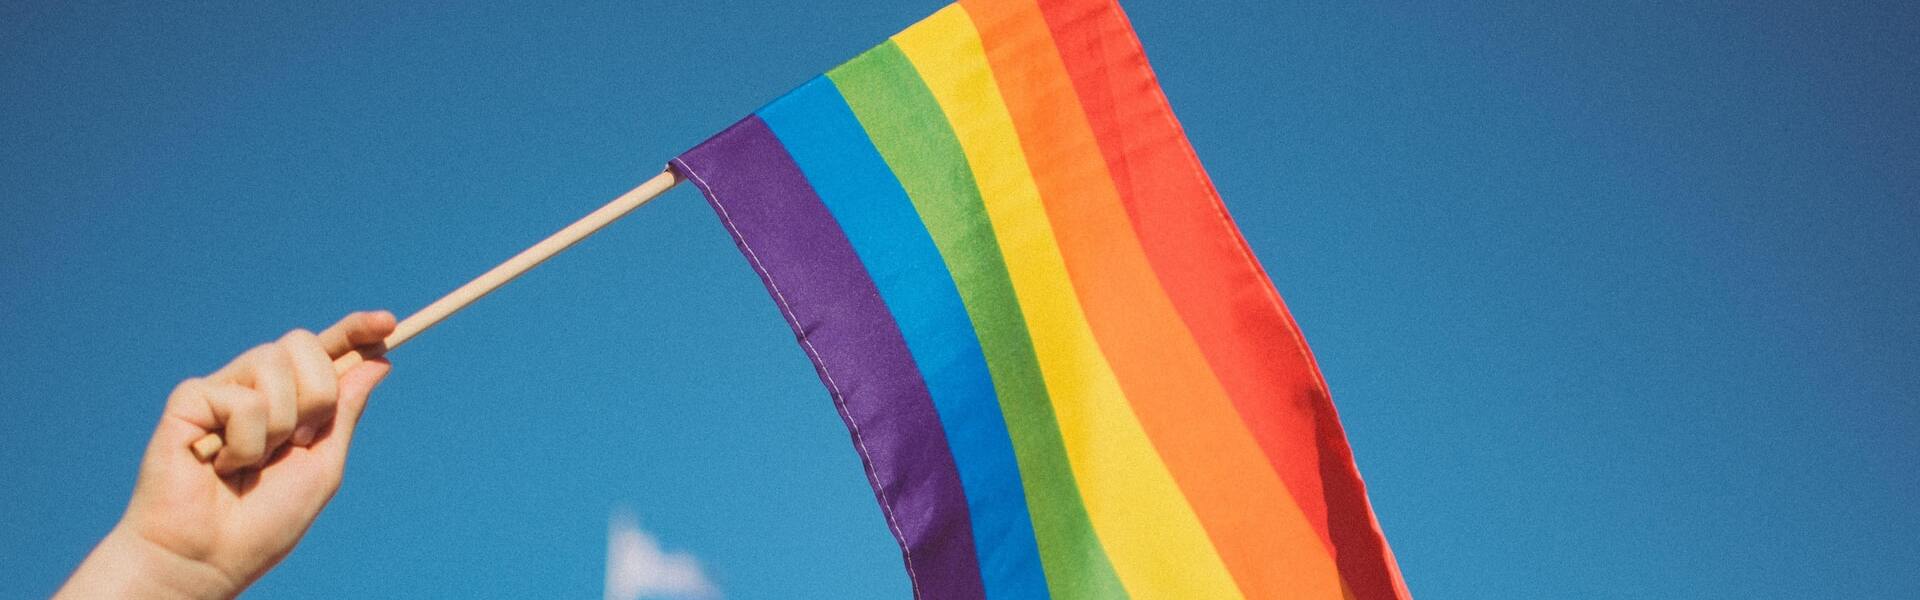 hand holding pride flag with sky in background